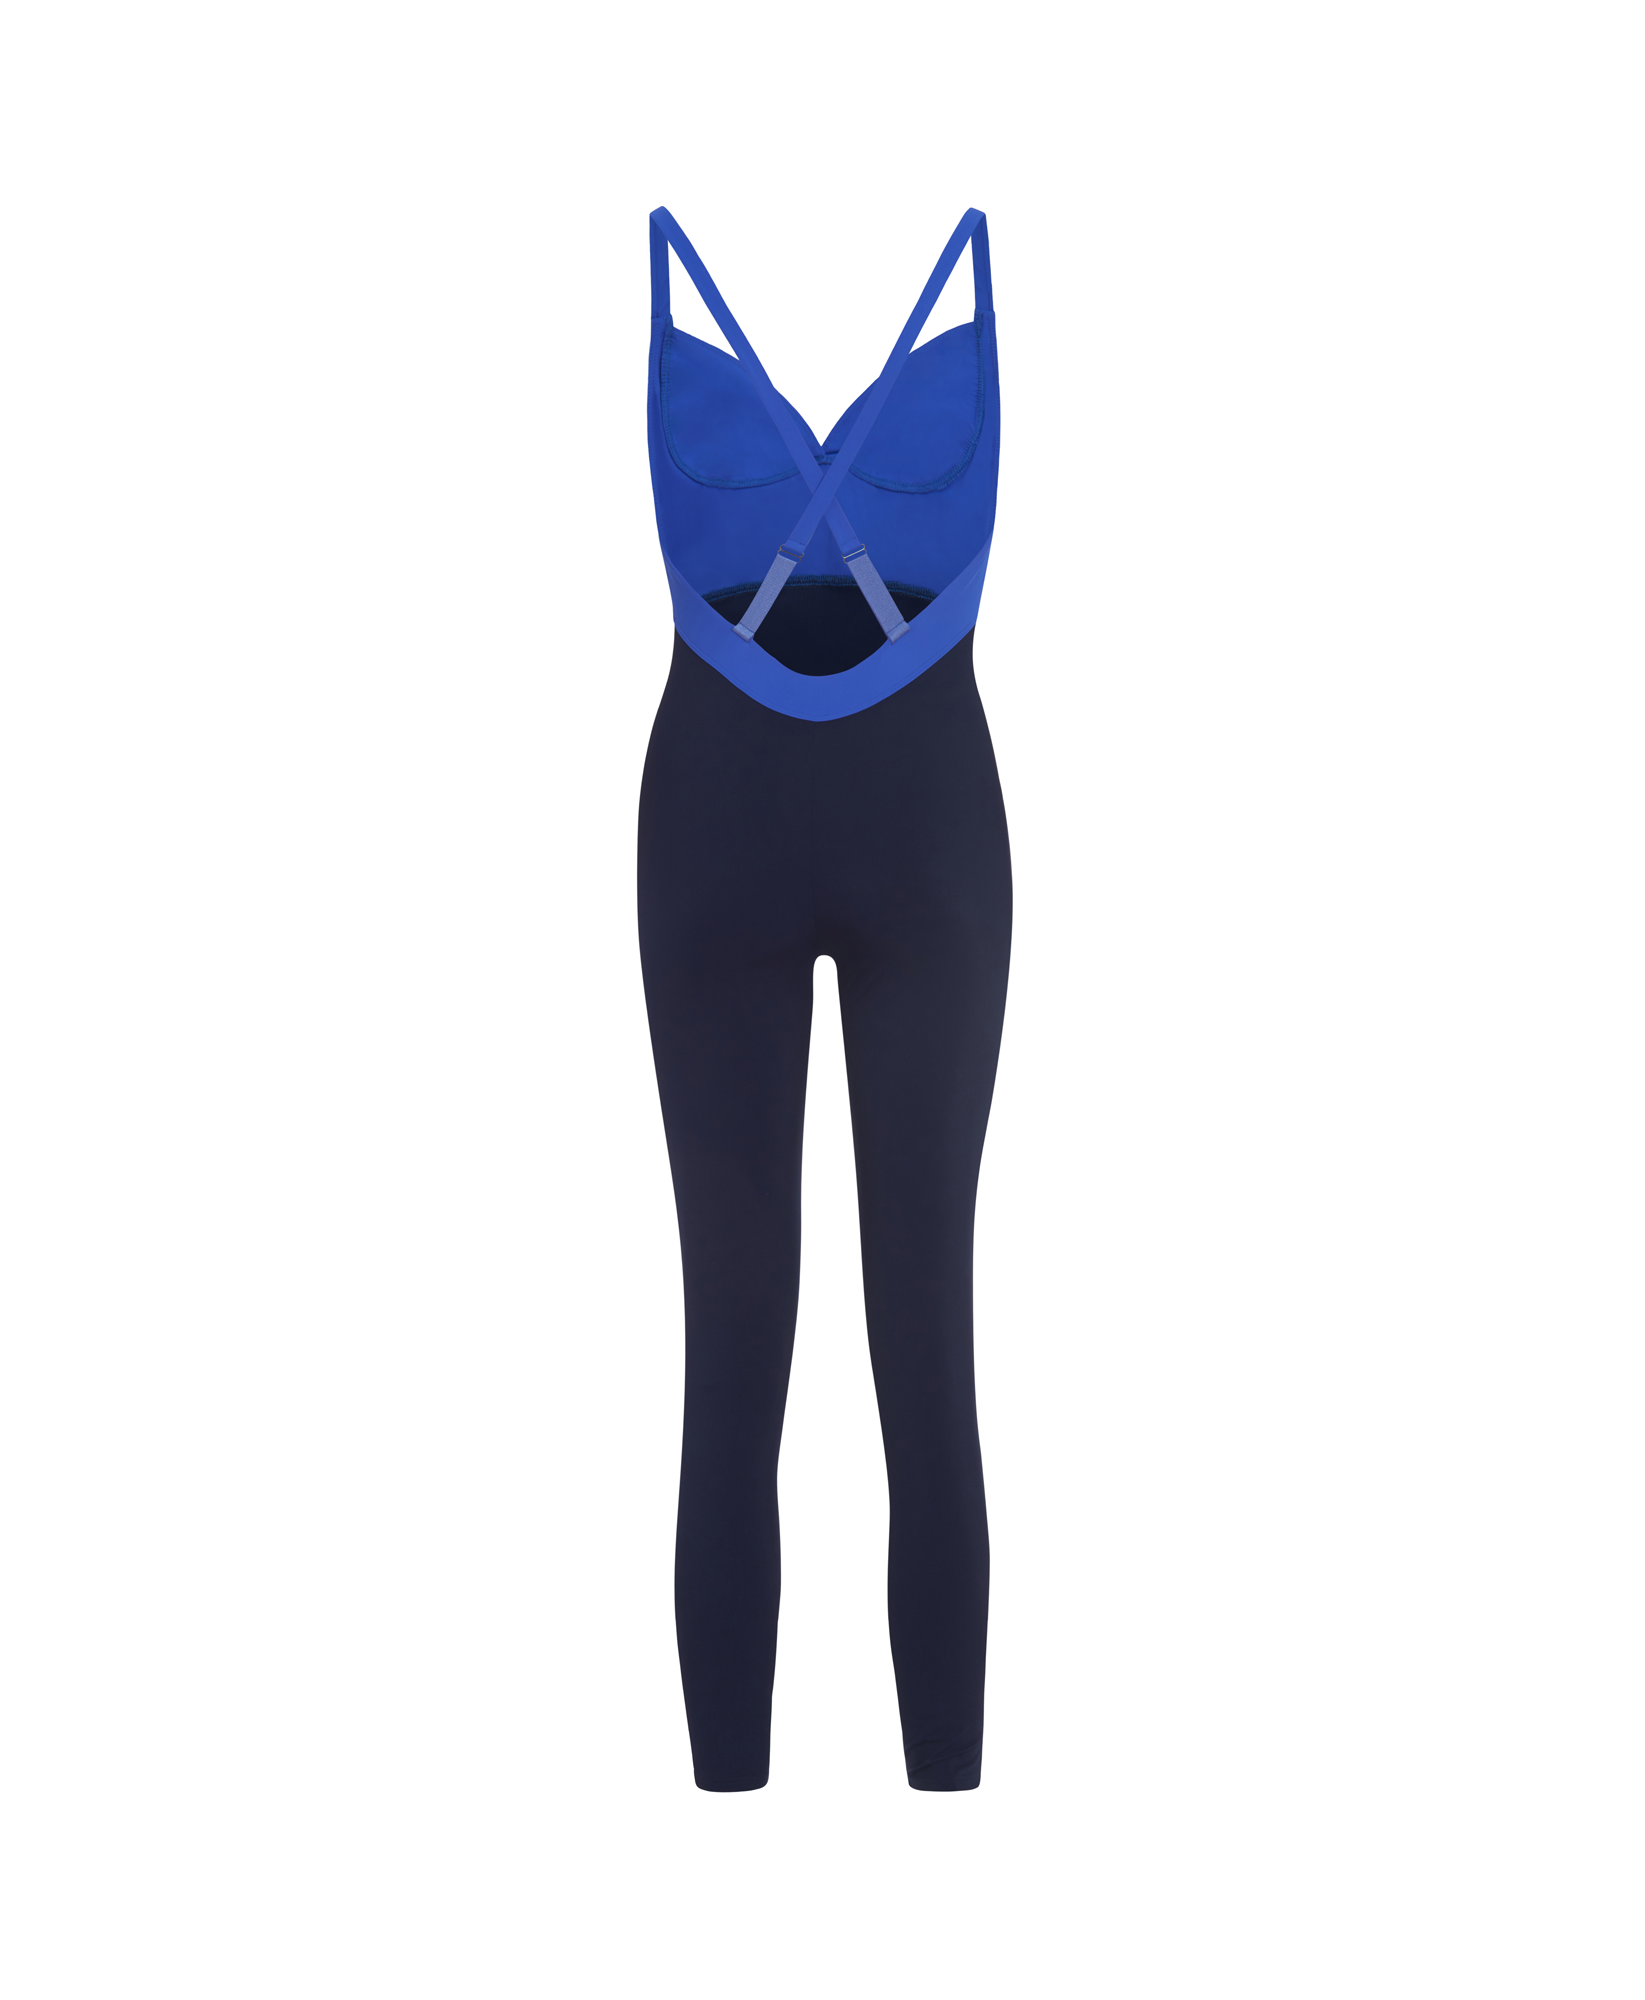 The Contour Unitard in Royal Blue and Navy Moisture Wicking Fabric